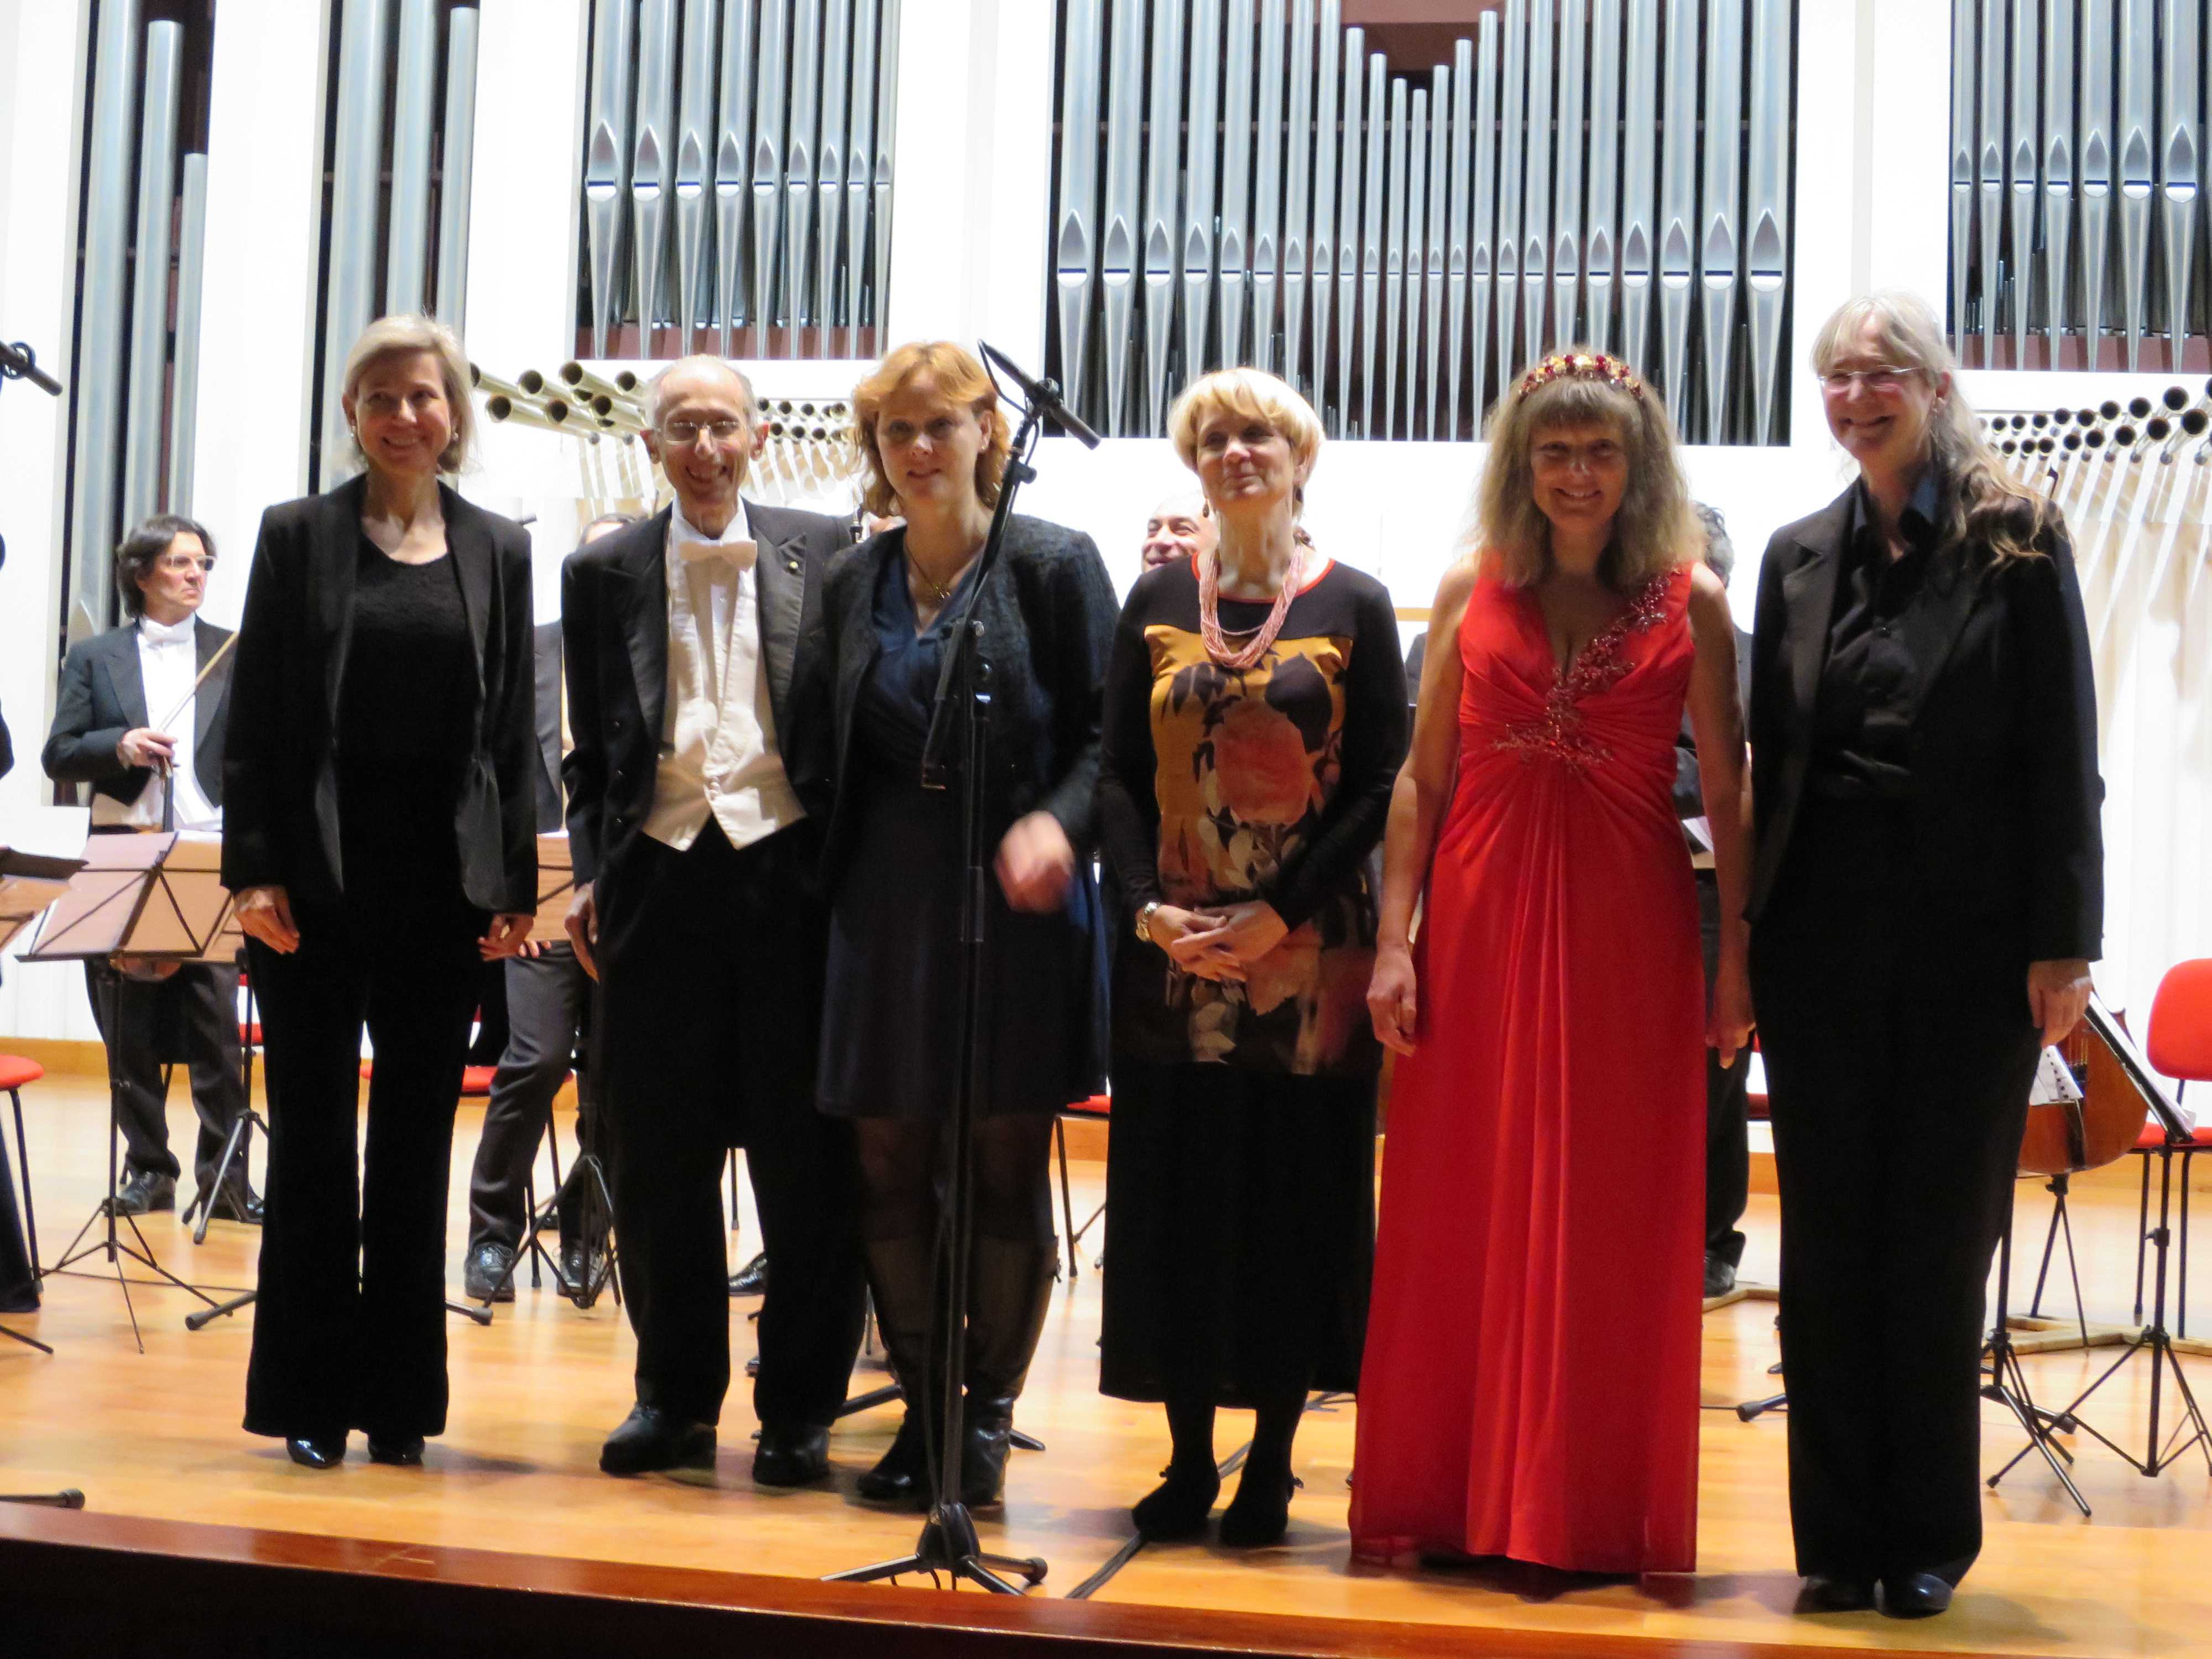 Five Composers after the concert, with Claudio Scimone (L-R: MH, MCDS, HJ, CS, FF, SM)